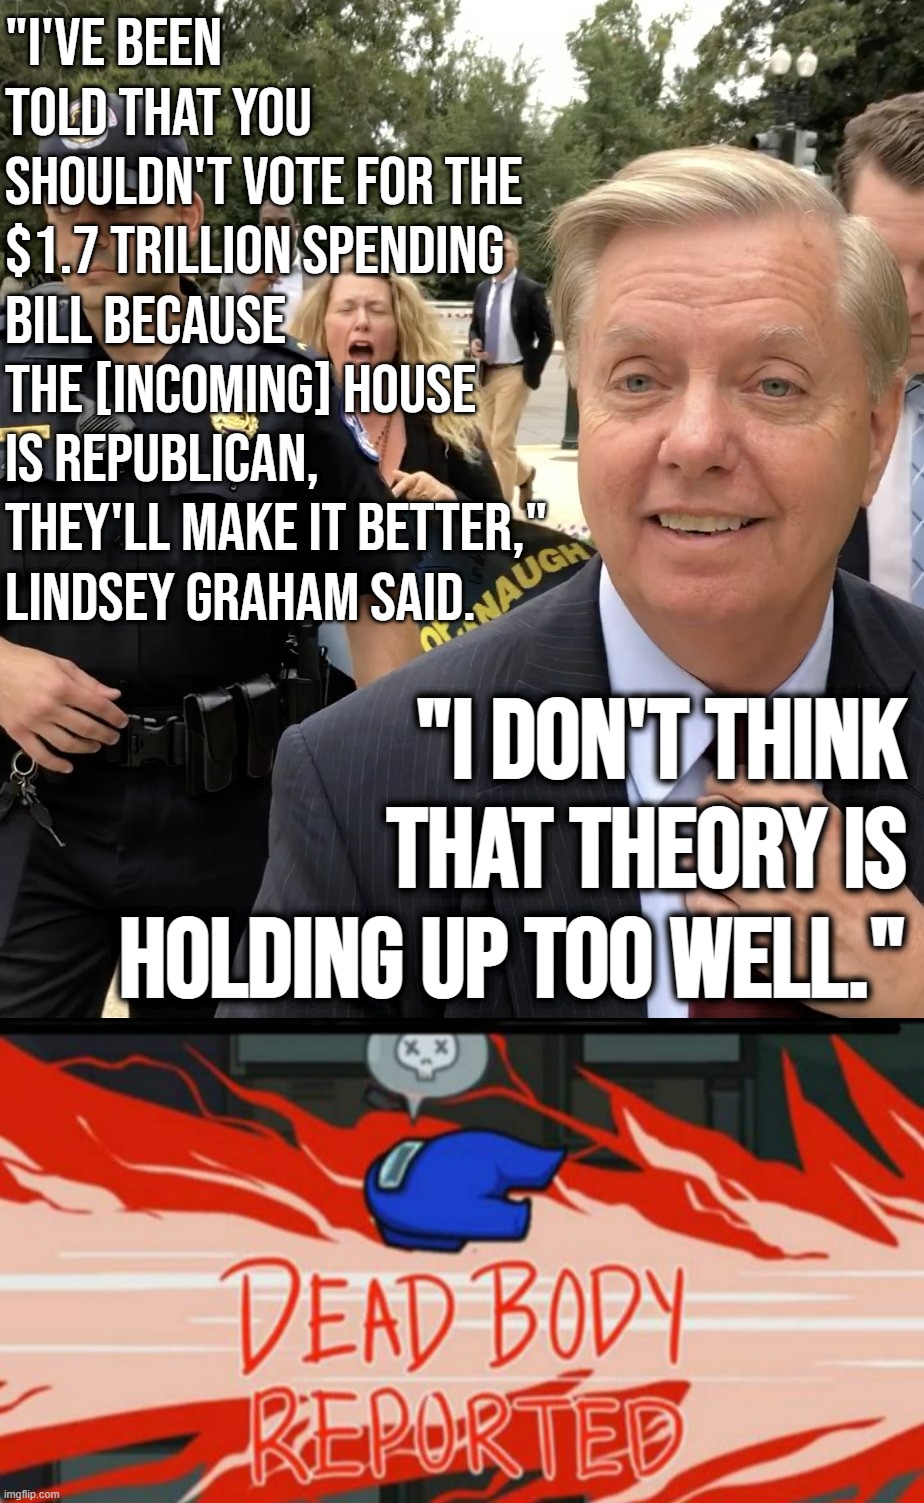 Bro Lindsey. You know the rules, you're not supposed to brutalize other R's like that. Stop this Republican-on-Republican crime | "I'VE BEEN TOLD THAT YOU SHOULDN'T VOTE FOR THE $1.7 TRILLION SPENDING BILL BECAUSE THE [INCOMING] HOUSE IS REPUBLICAN, THEY'LL MAKE IT BETTER," LINDSEY GRAHAM SAID. "I DON'T THINK THAT THEORY IS HOLDING UP TOO WELL." | image tagged in lindsey graham thug life,dead body reported,lindsey graham,republicans,republican party,republican on republican crime | made w/ Imgflip meme maker